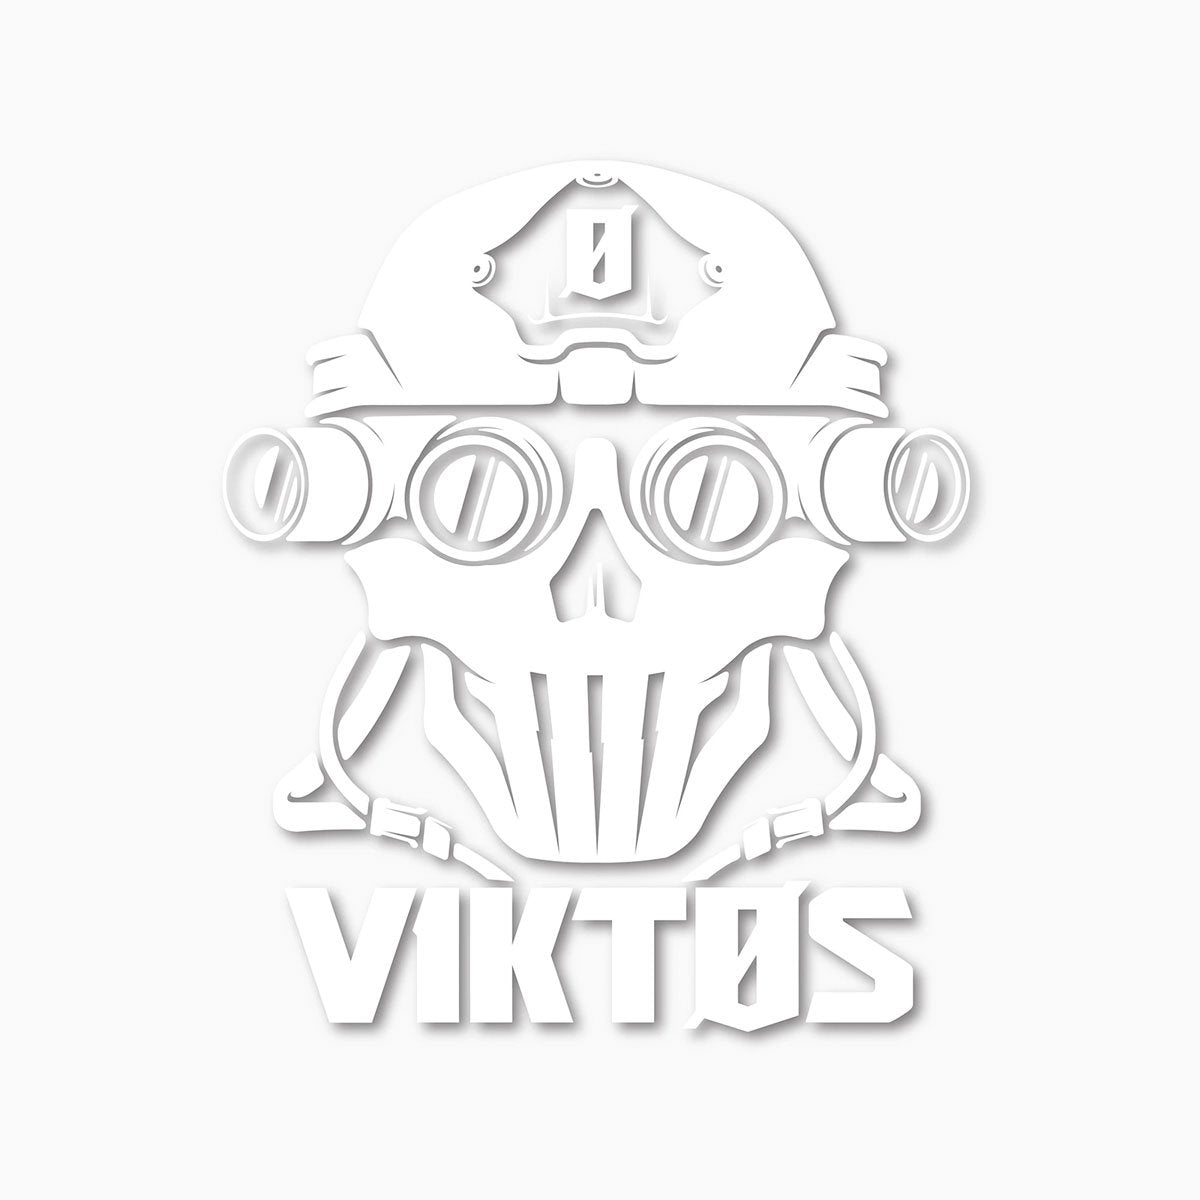 VIKTOS 12 Inches Four Eyes Decal Accessories VIKTOS Tactical Gear Supplier Tactical Distributors Australia